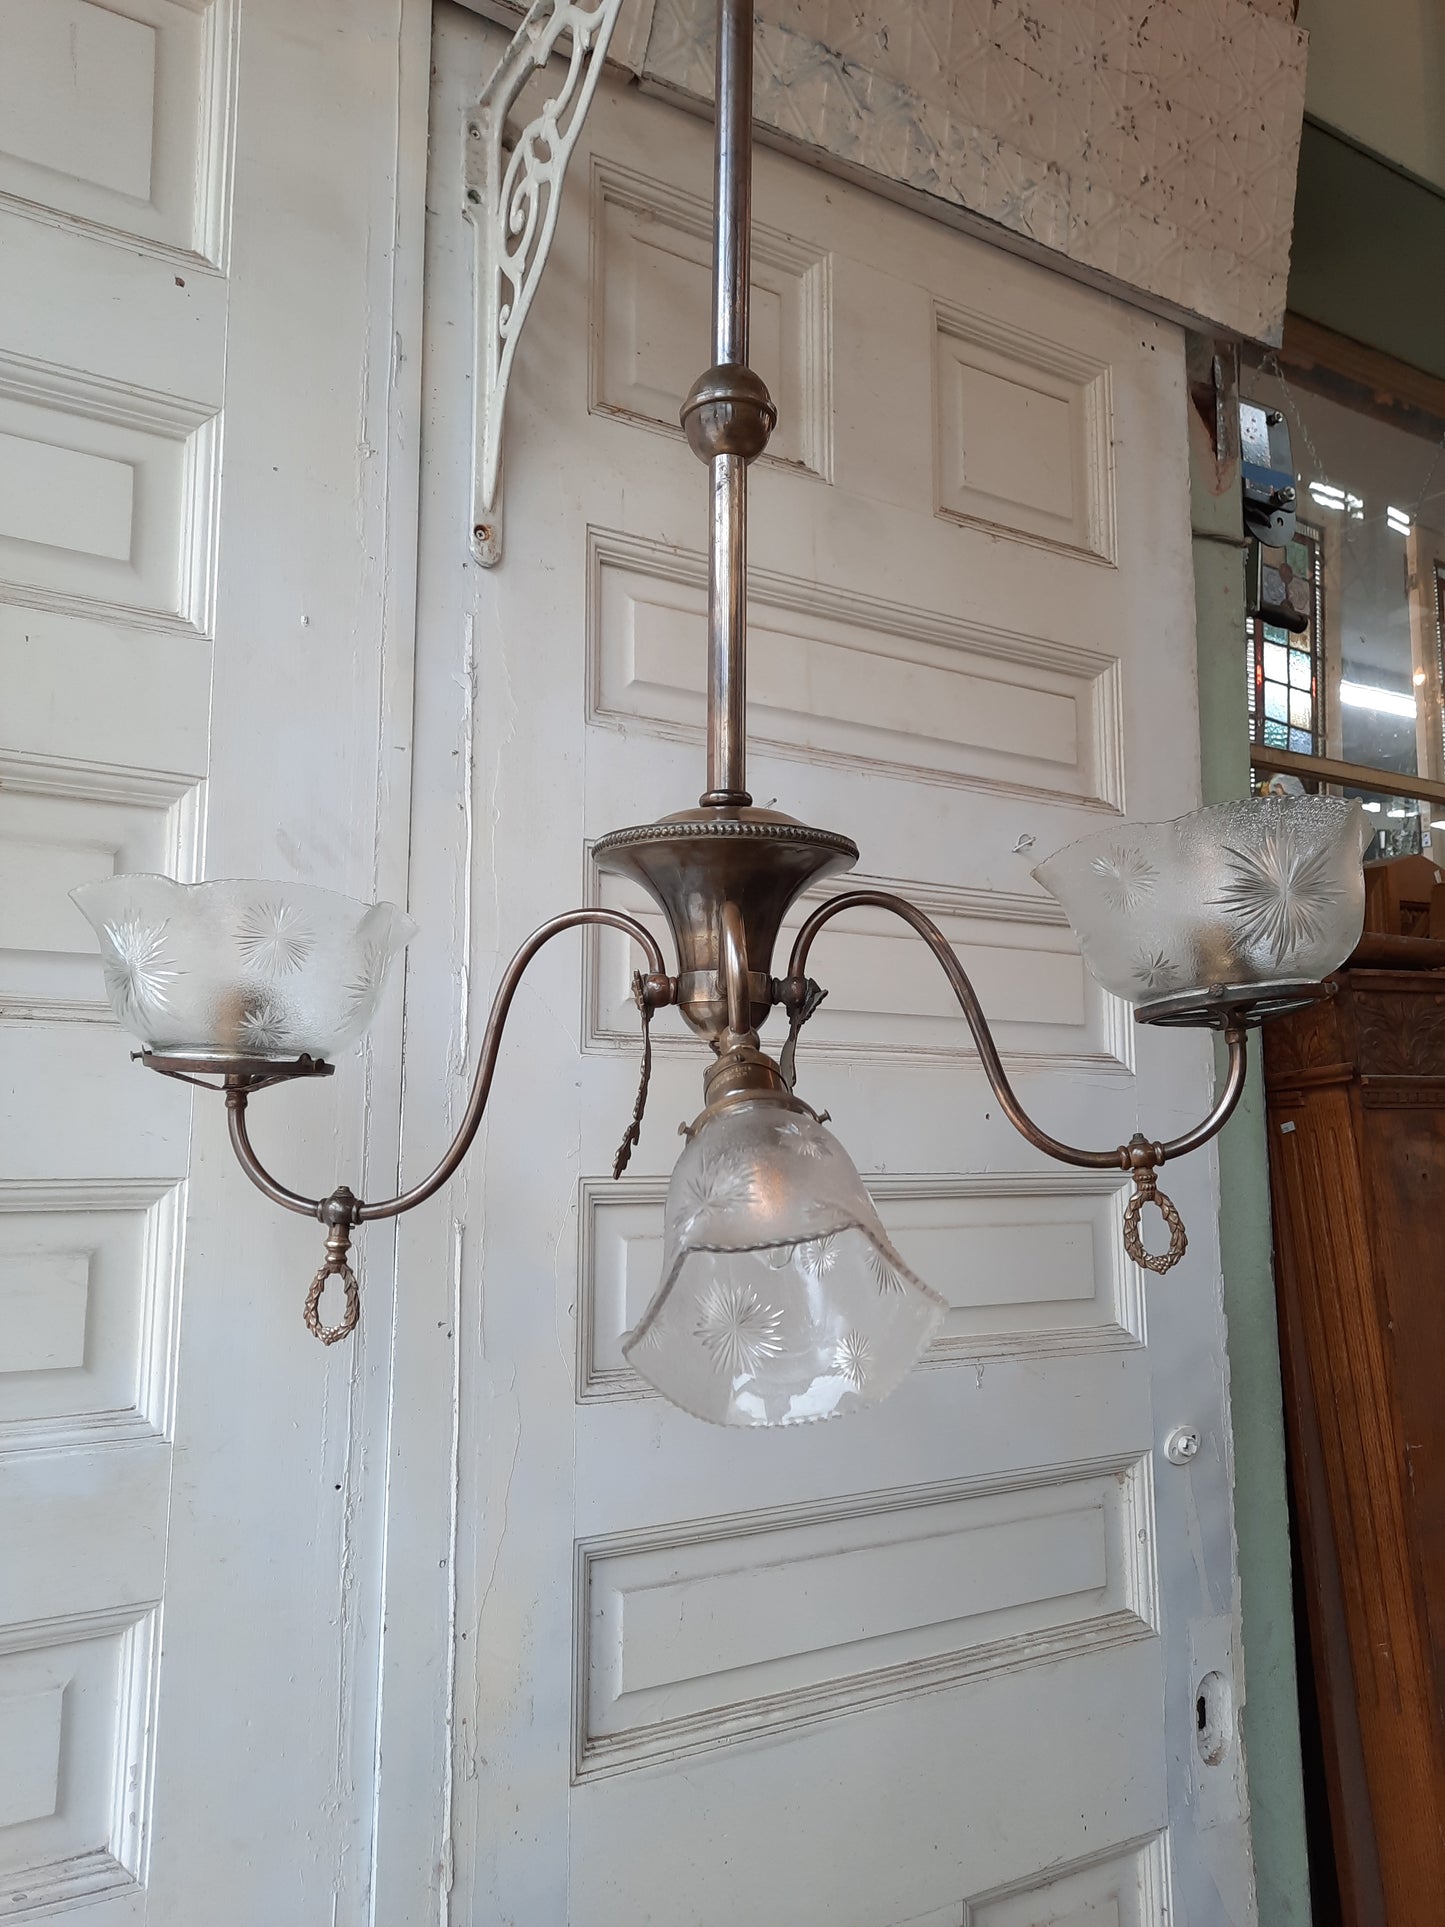 Converted Gas and Electric Antique Chandelier with Cherub Faces, Victorian Era Brass Gasolier Light